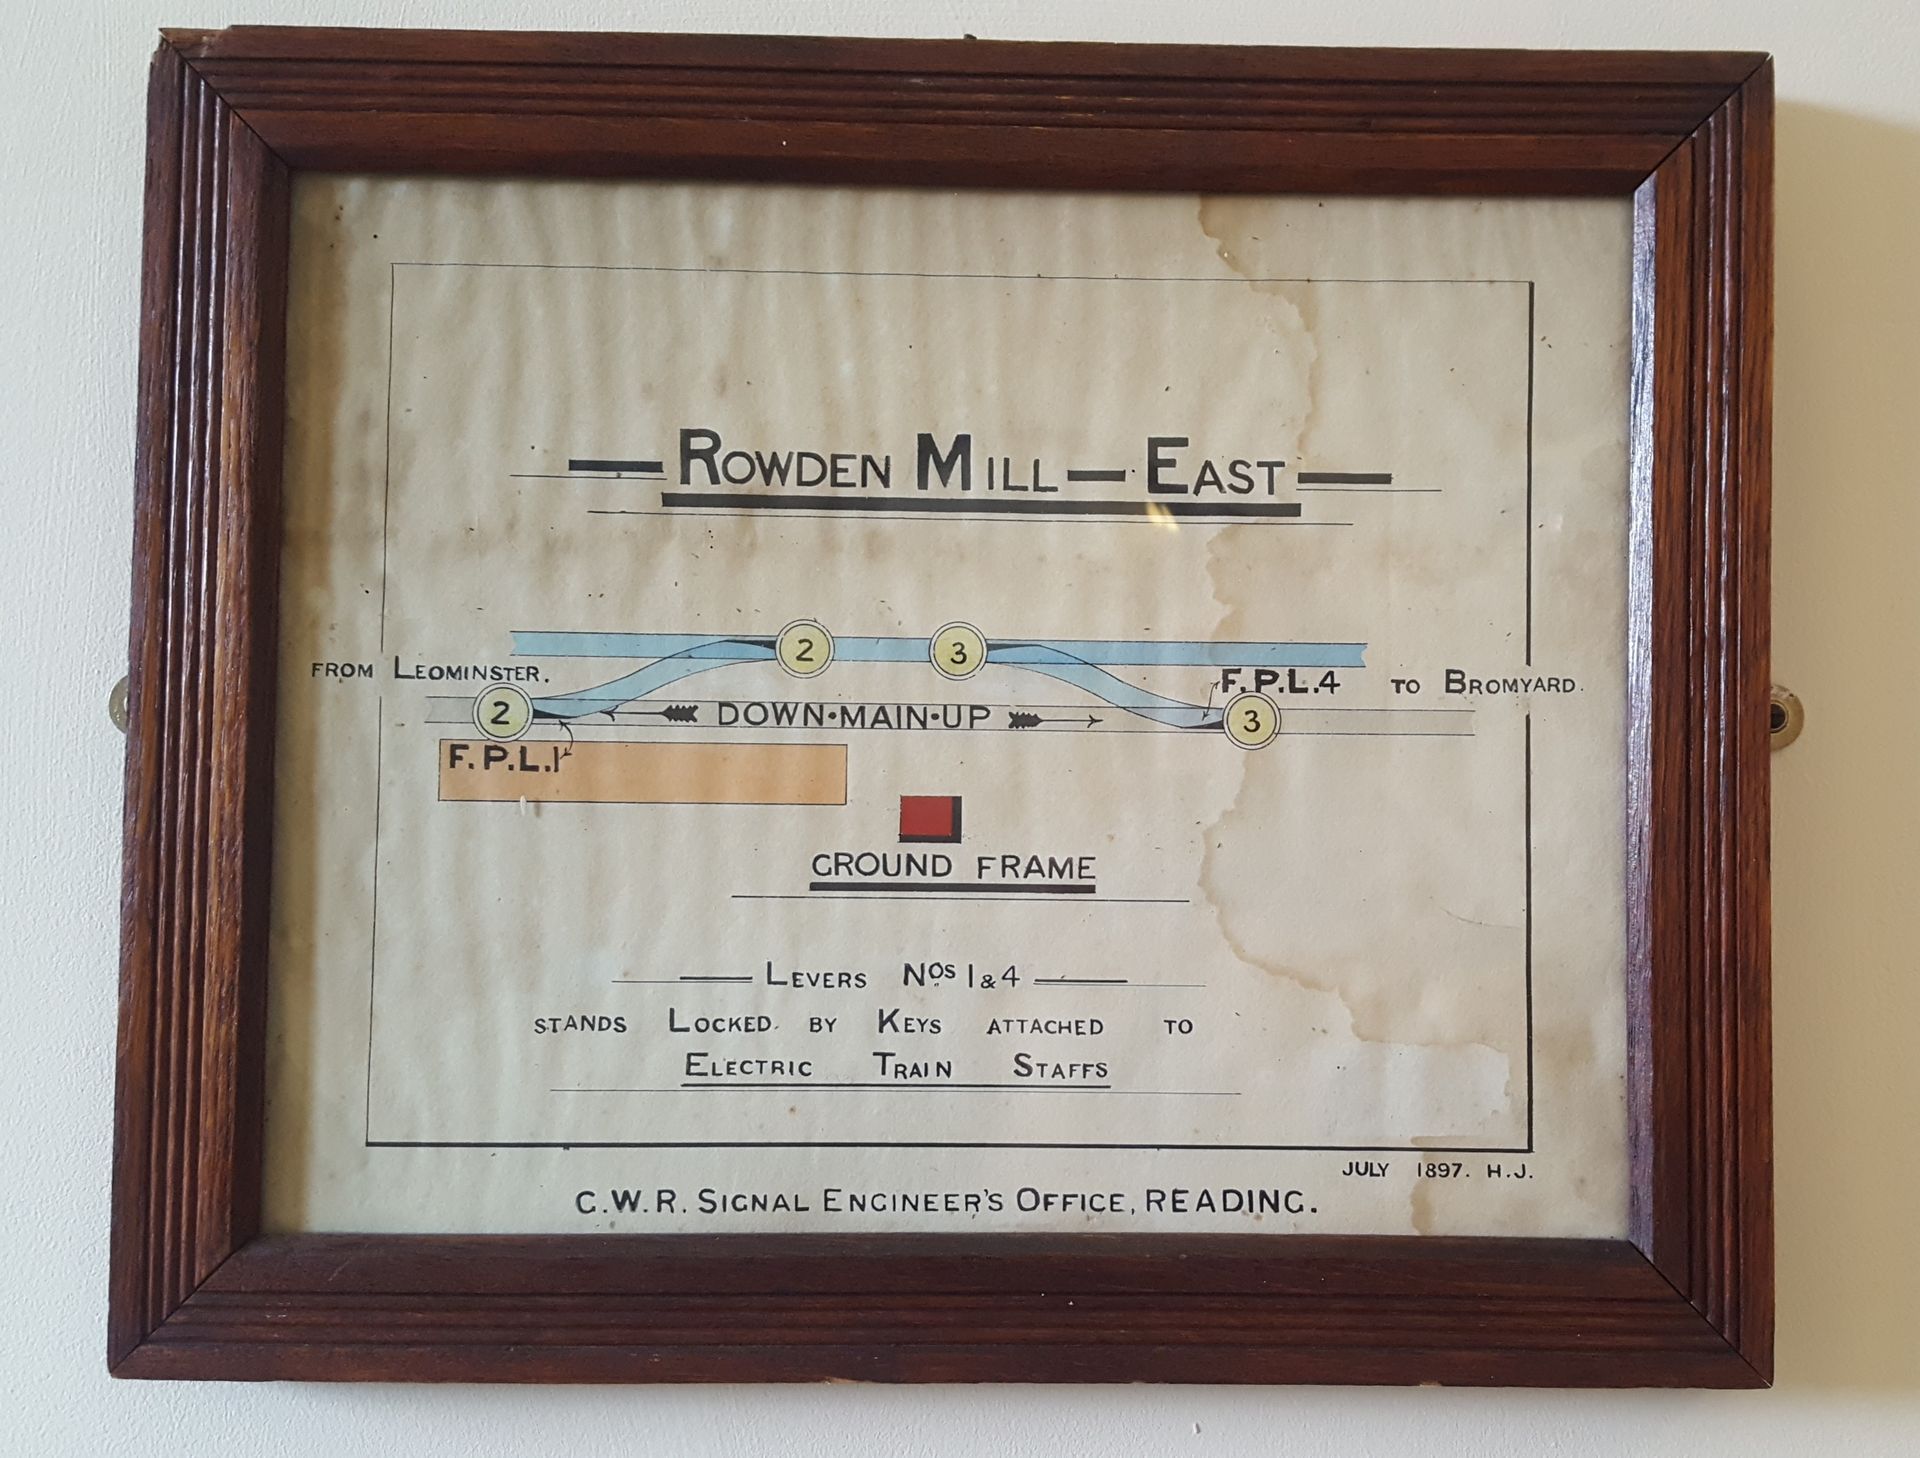 The original Ground Frame and Signalling Diagram from July 1897.
GWR Signal Engineer's Office, Reading